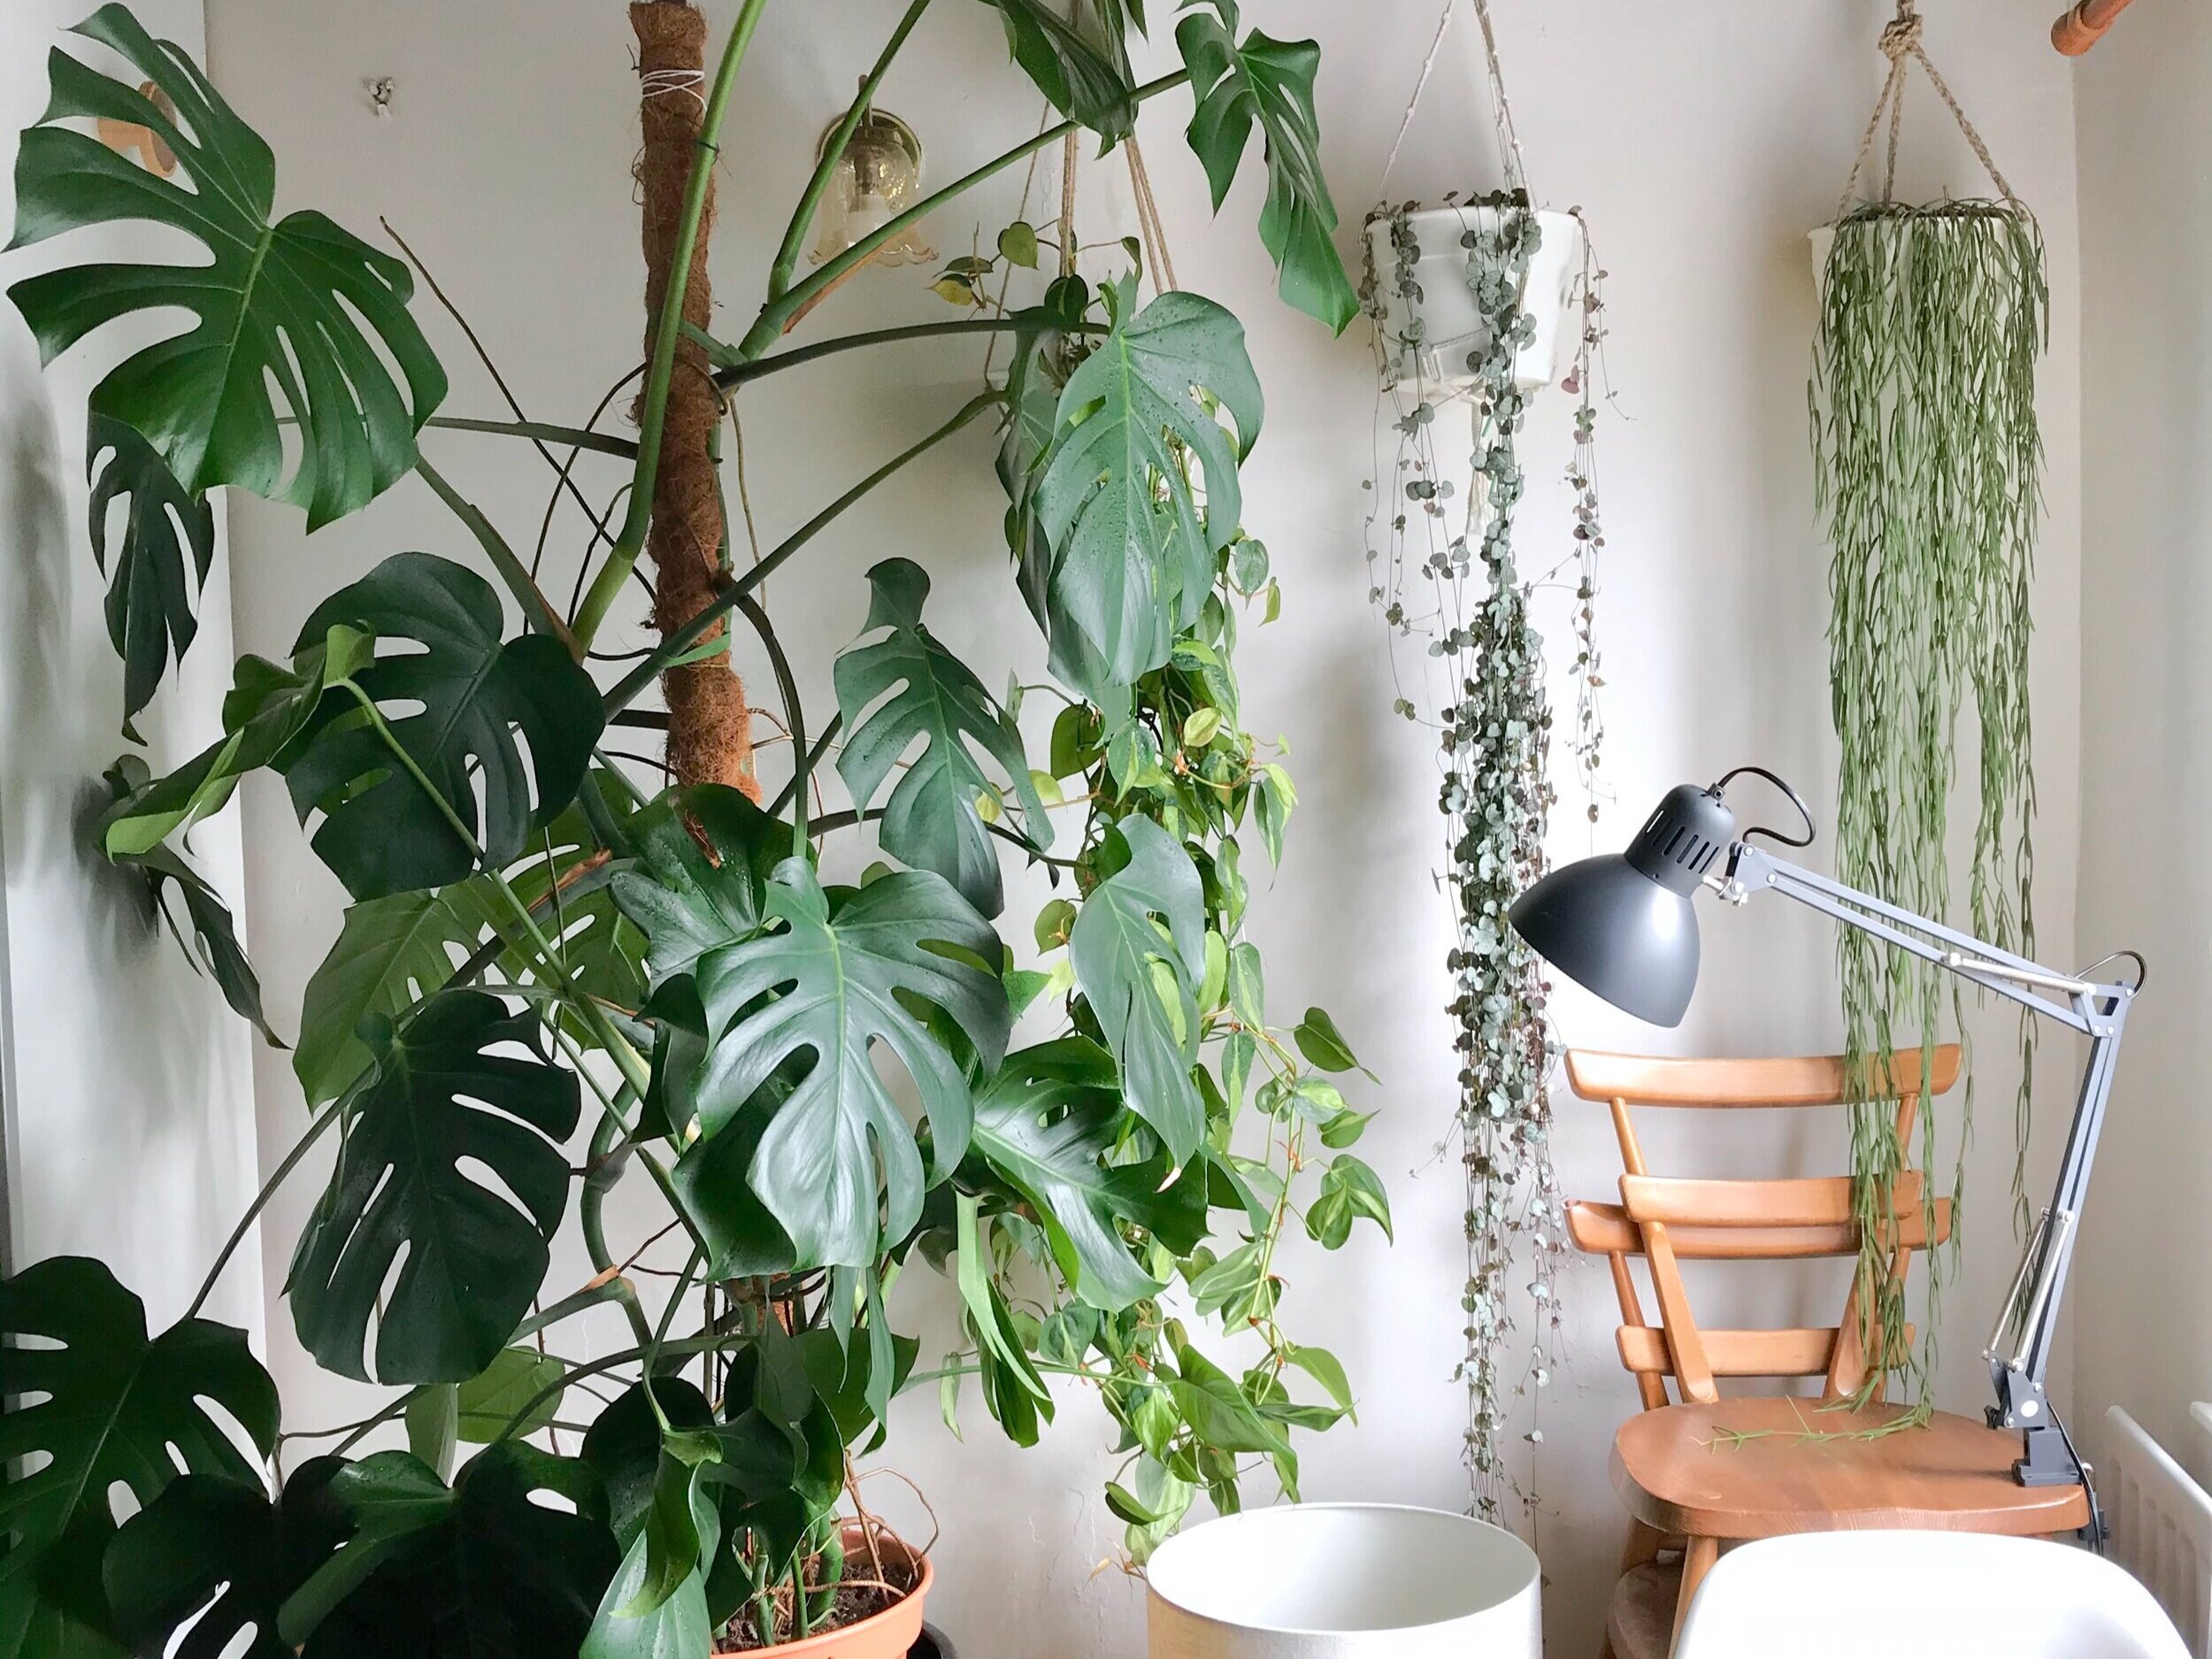 Grow Lights As Recommended By House Plant Enthusiasts Green Rooms Market